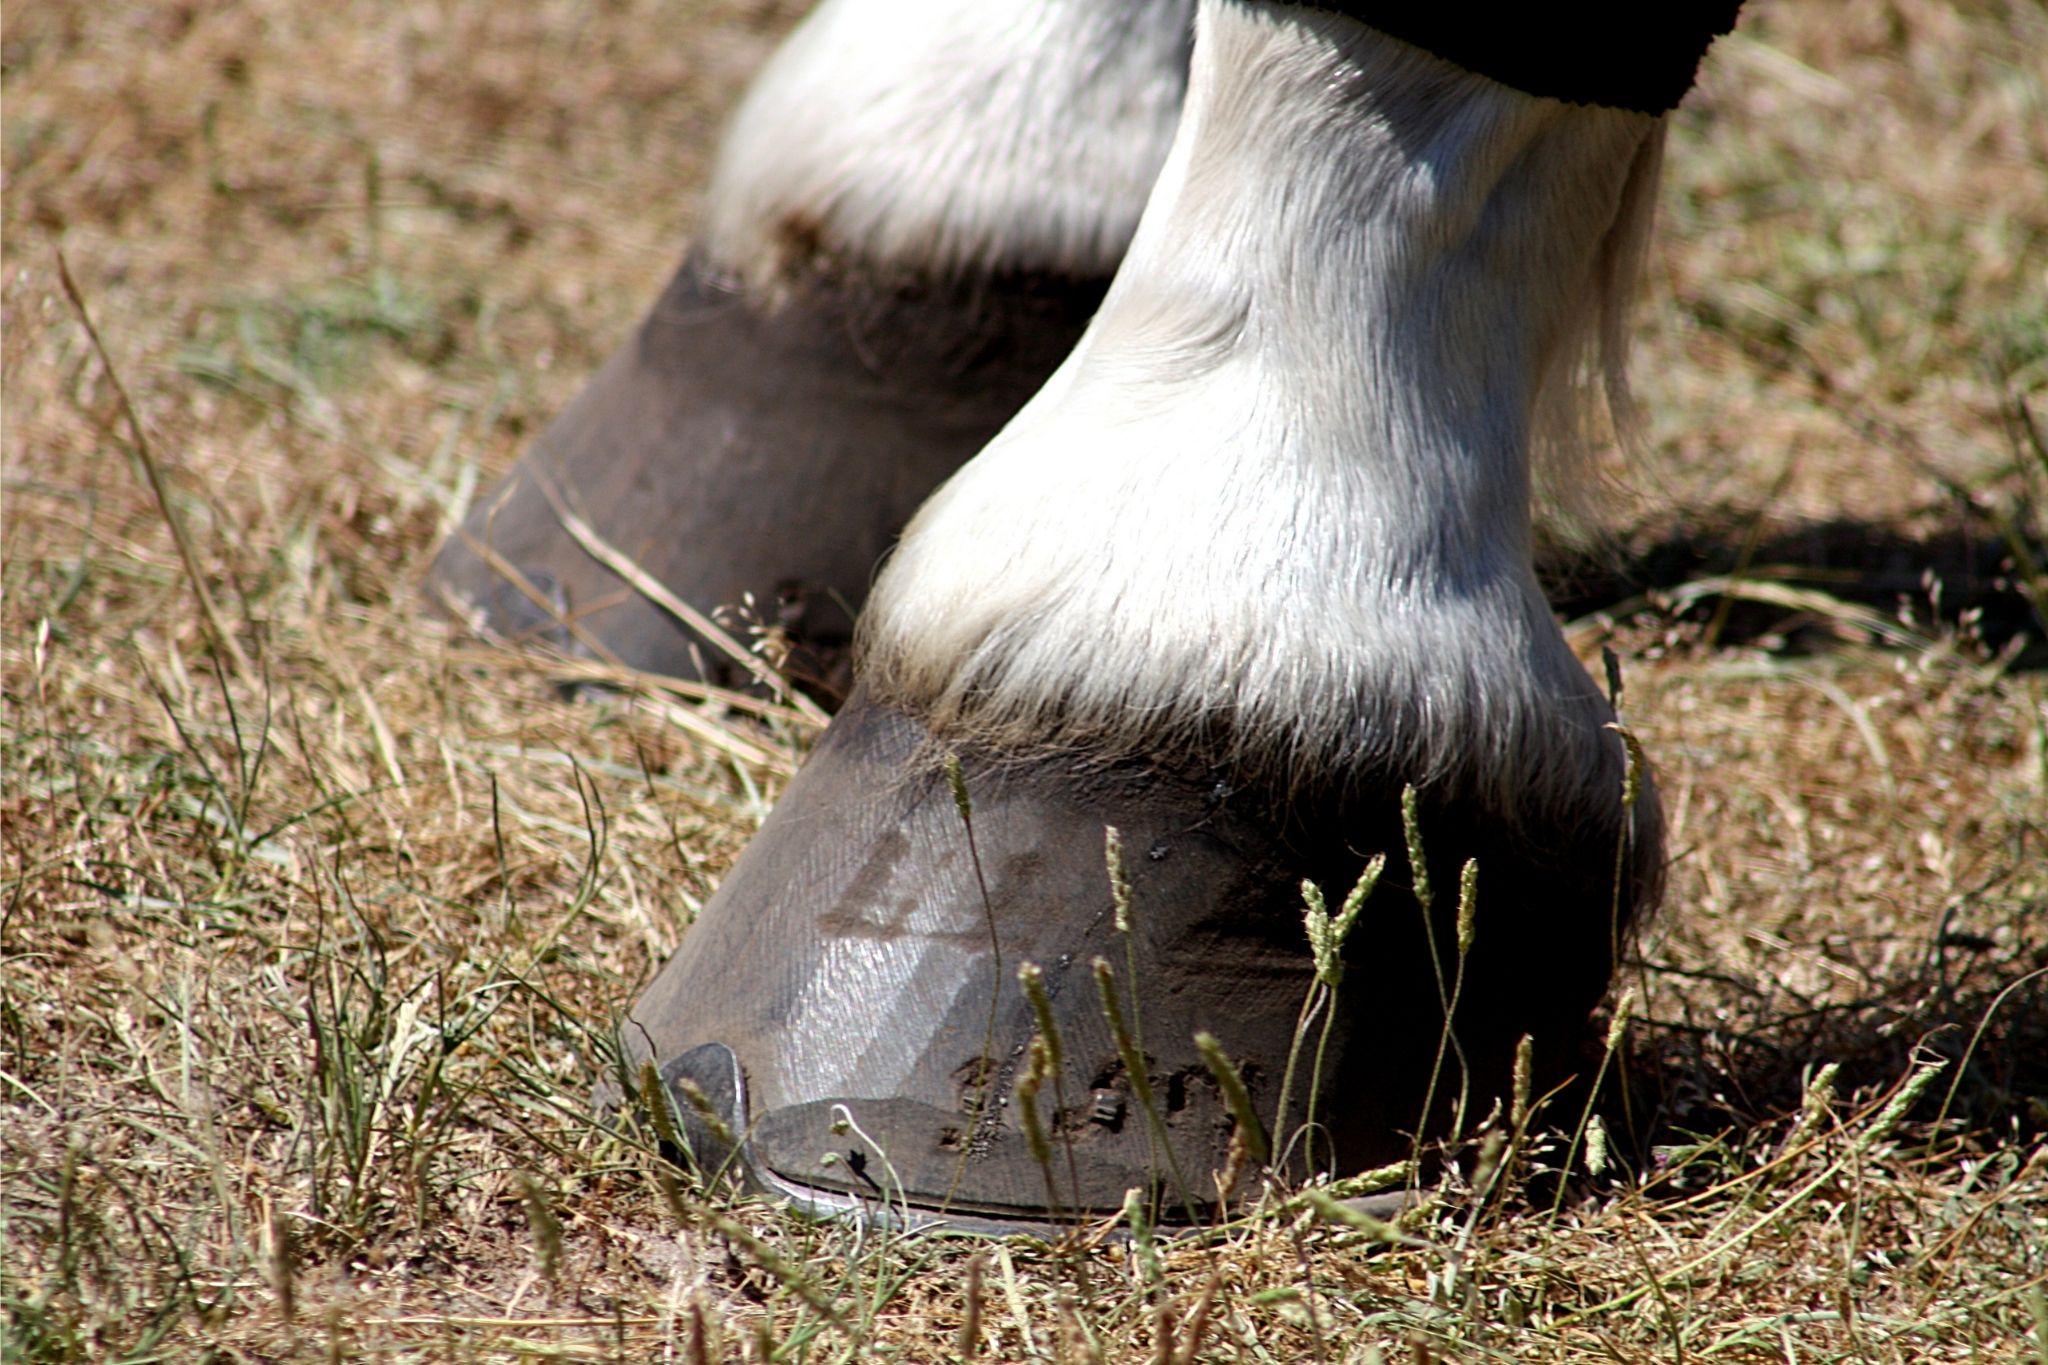 Horse Hoof Terminology Every Equestrian Should Know